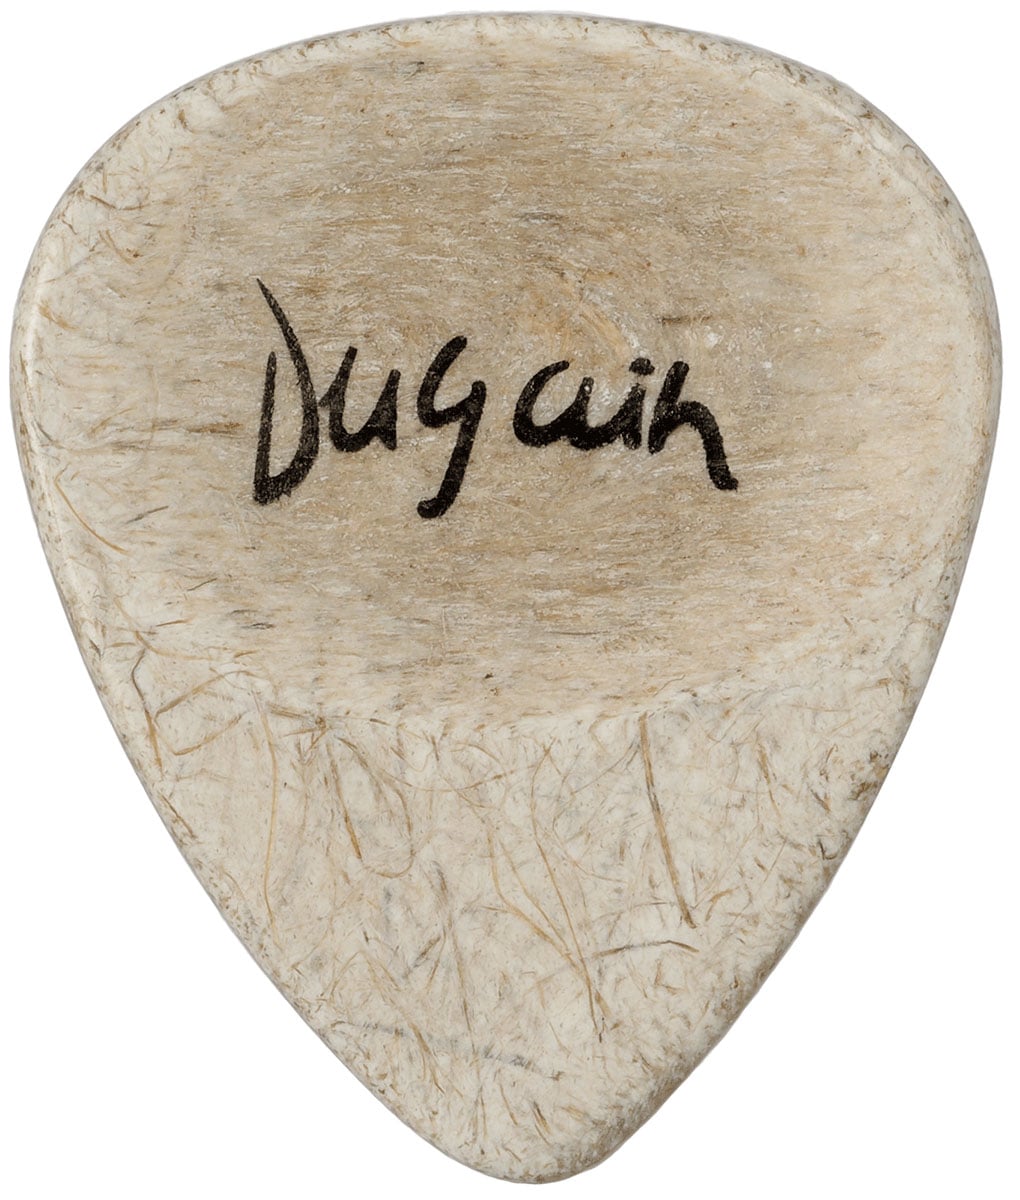 DUGAIN HANDCRAFTED 3MM KAIRLIN GUITAR PICK